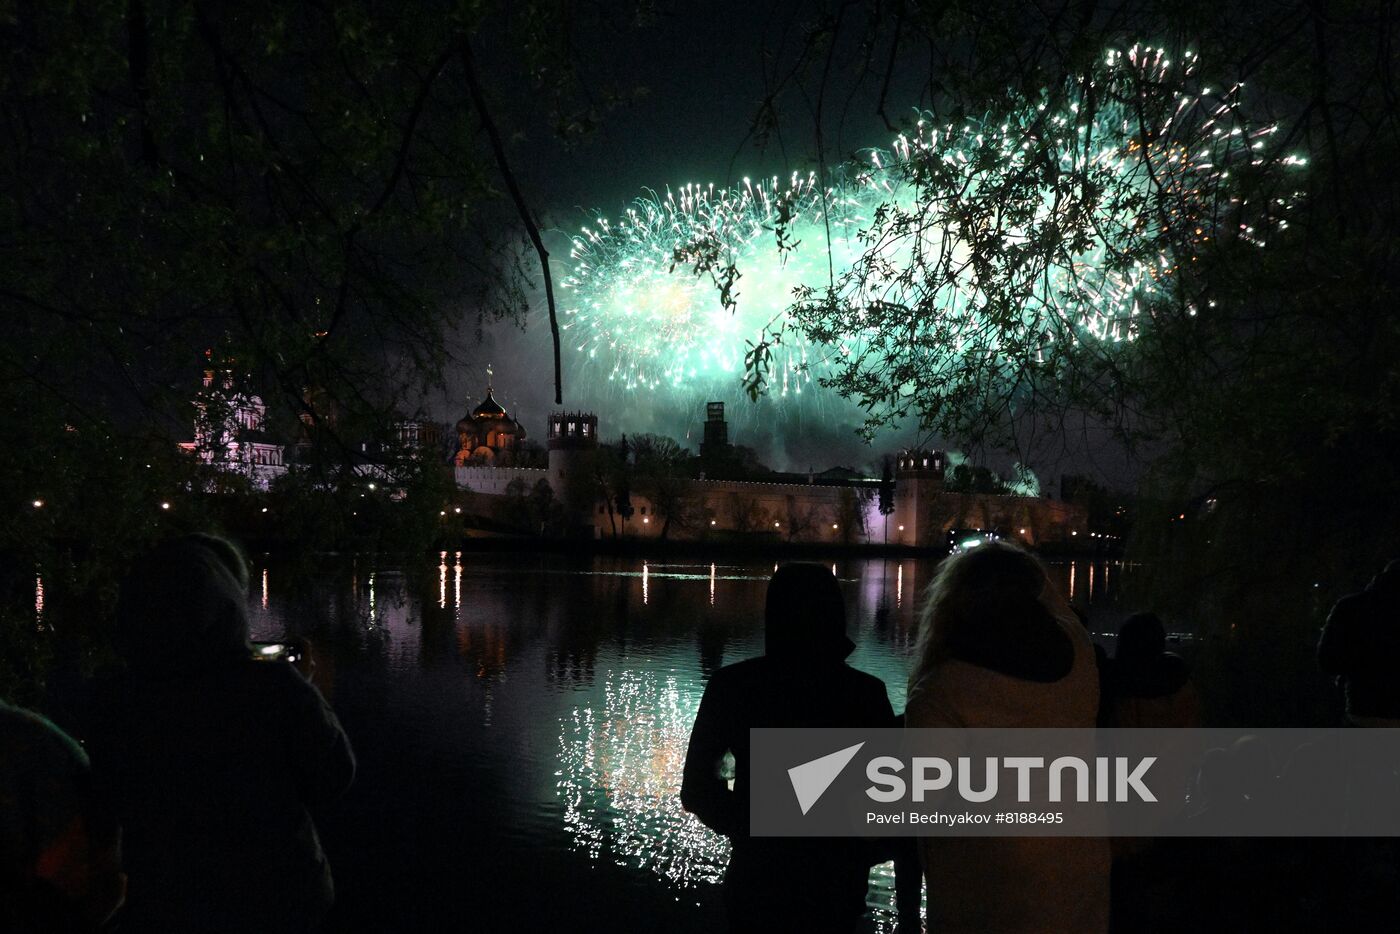 Russia WWII Victory Day Fireworks